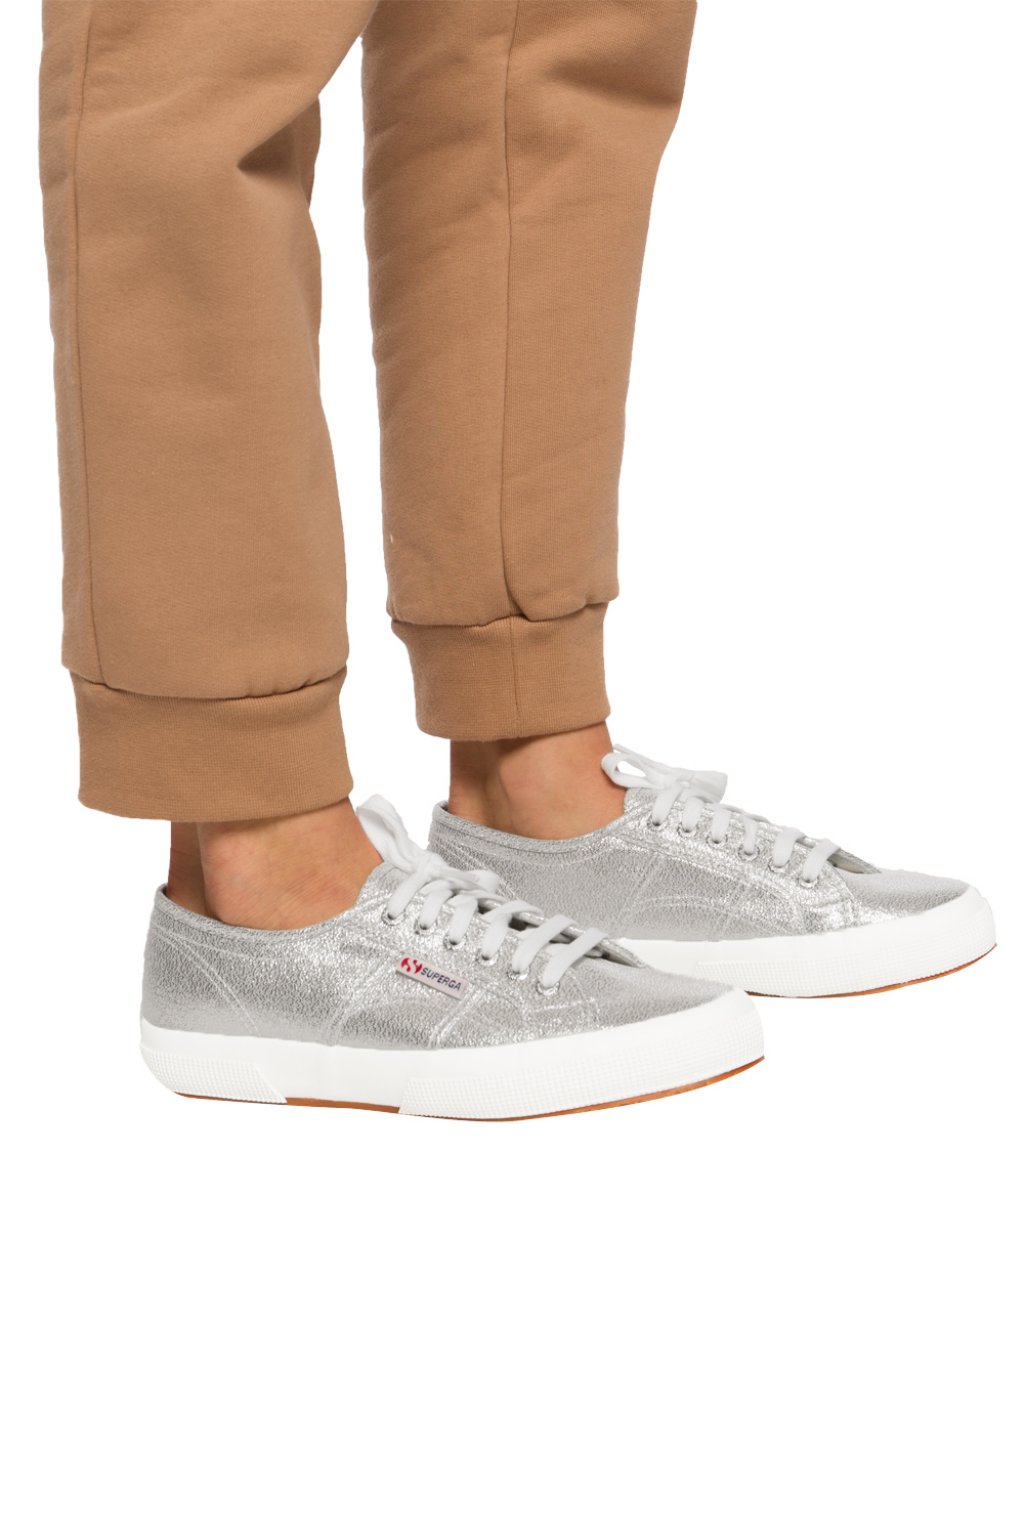 Superga 'Lamew' lace-up sneakers